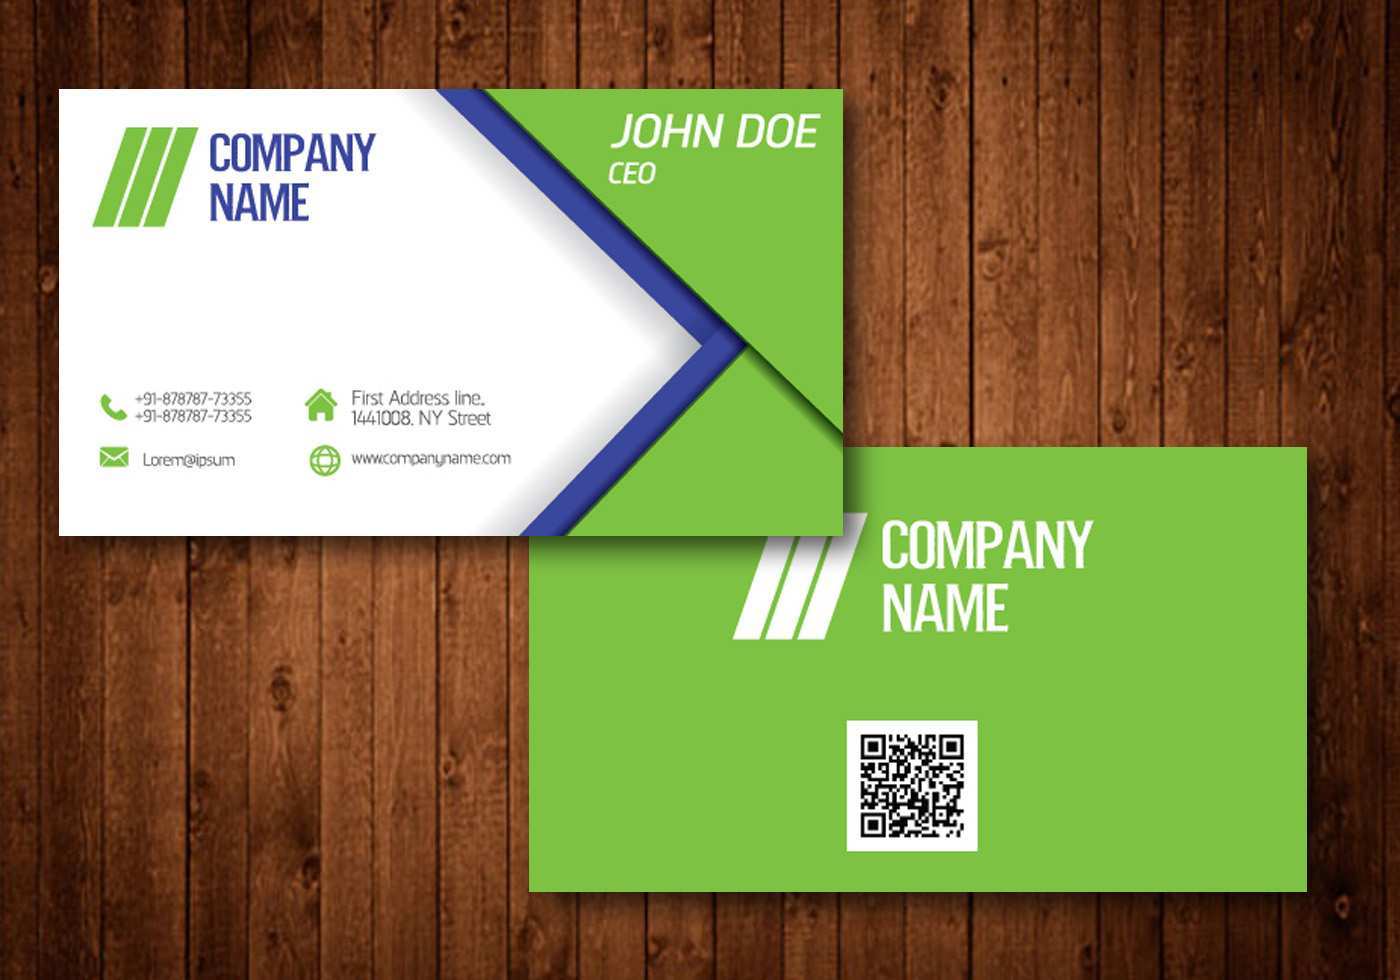 78 Create Name Card Template Vector Free Download Photo by Name Card Template Vector Free Download